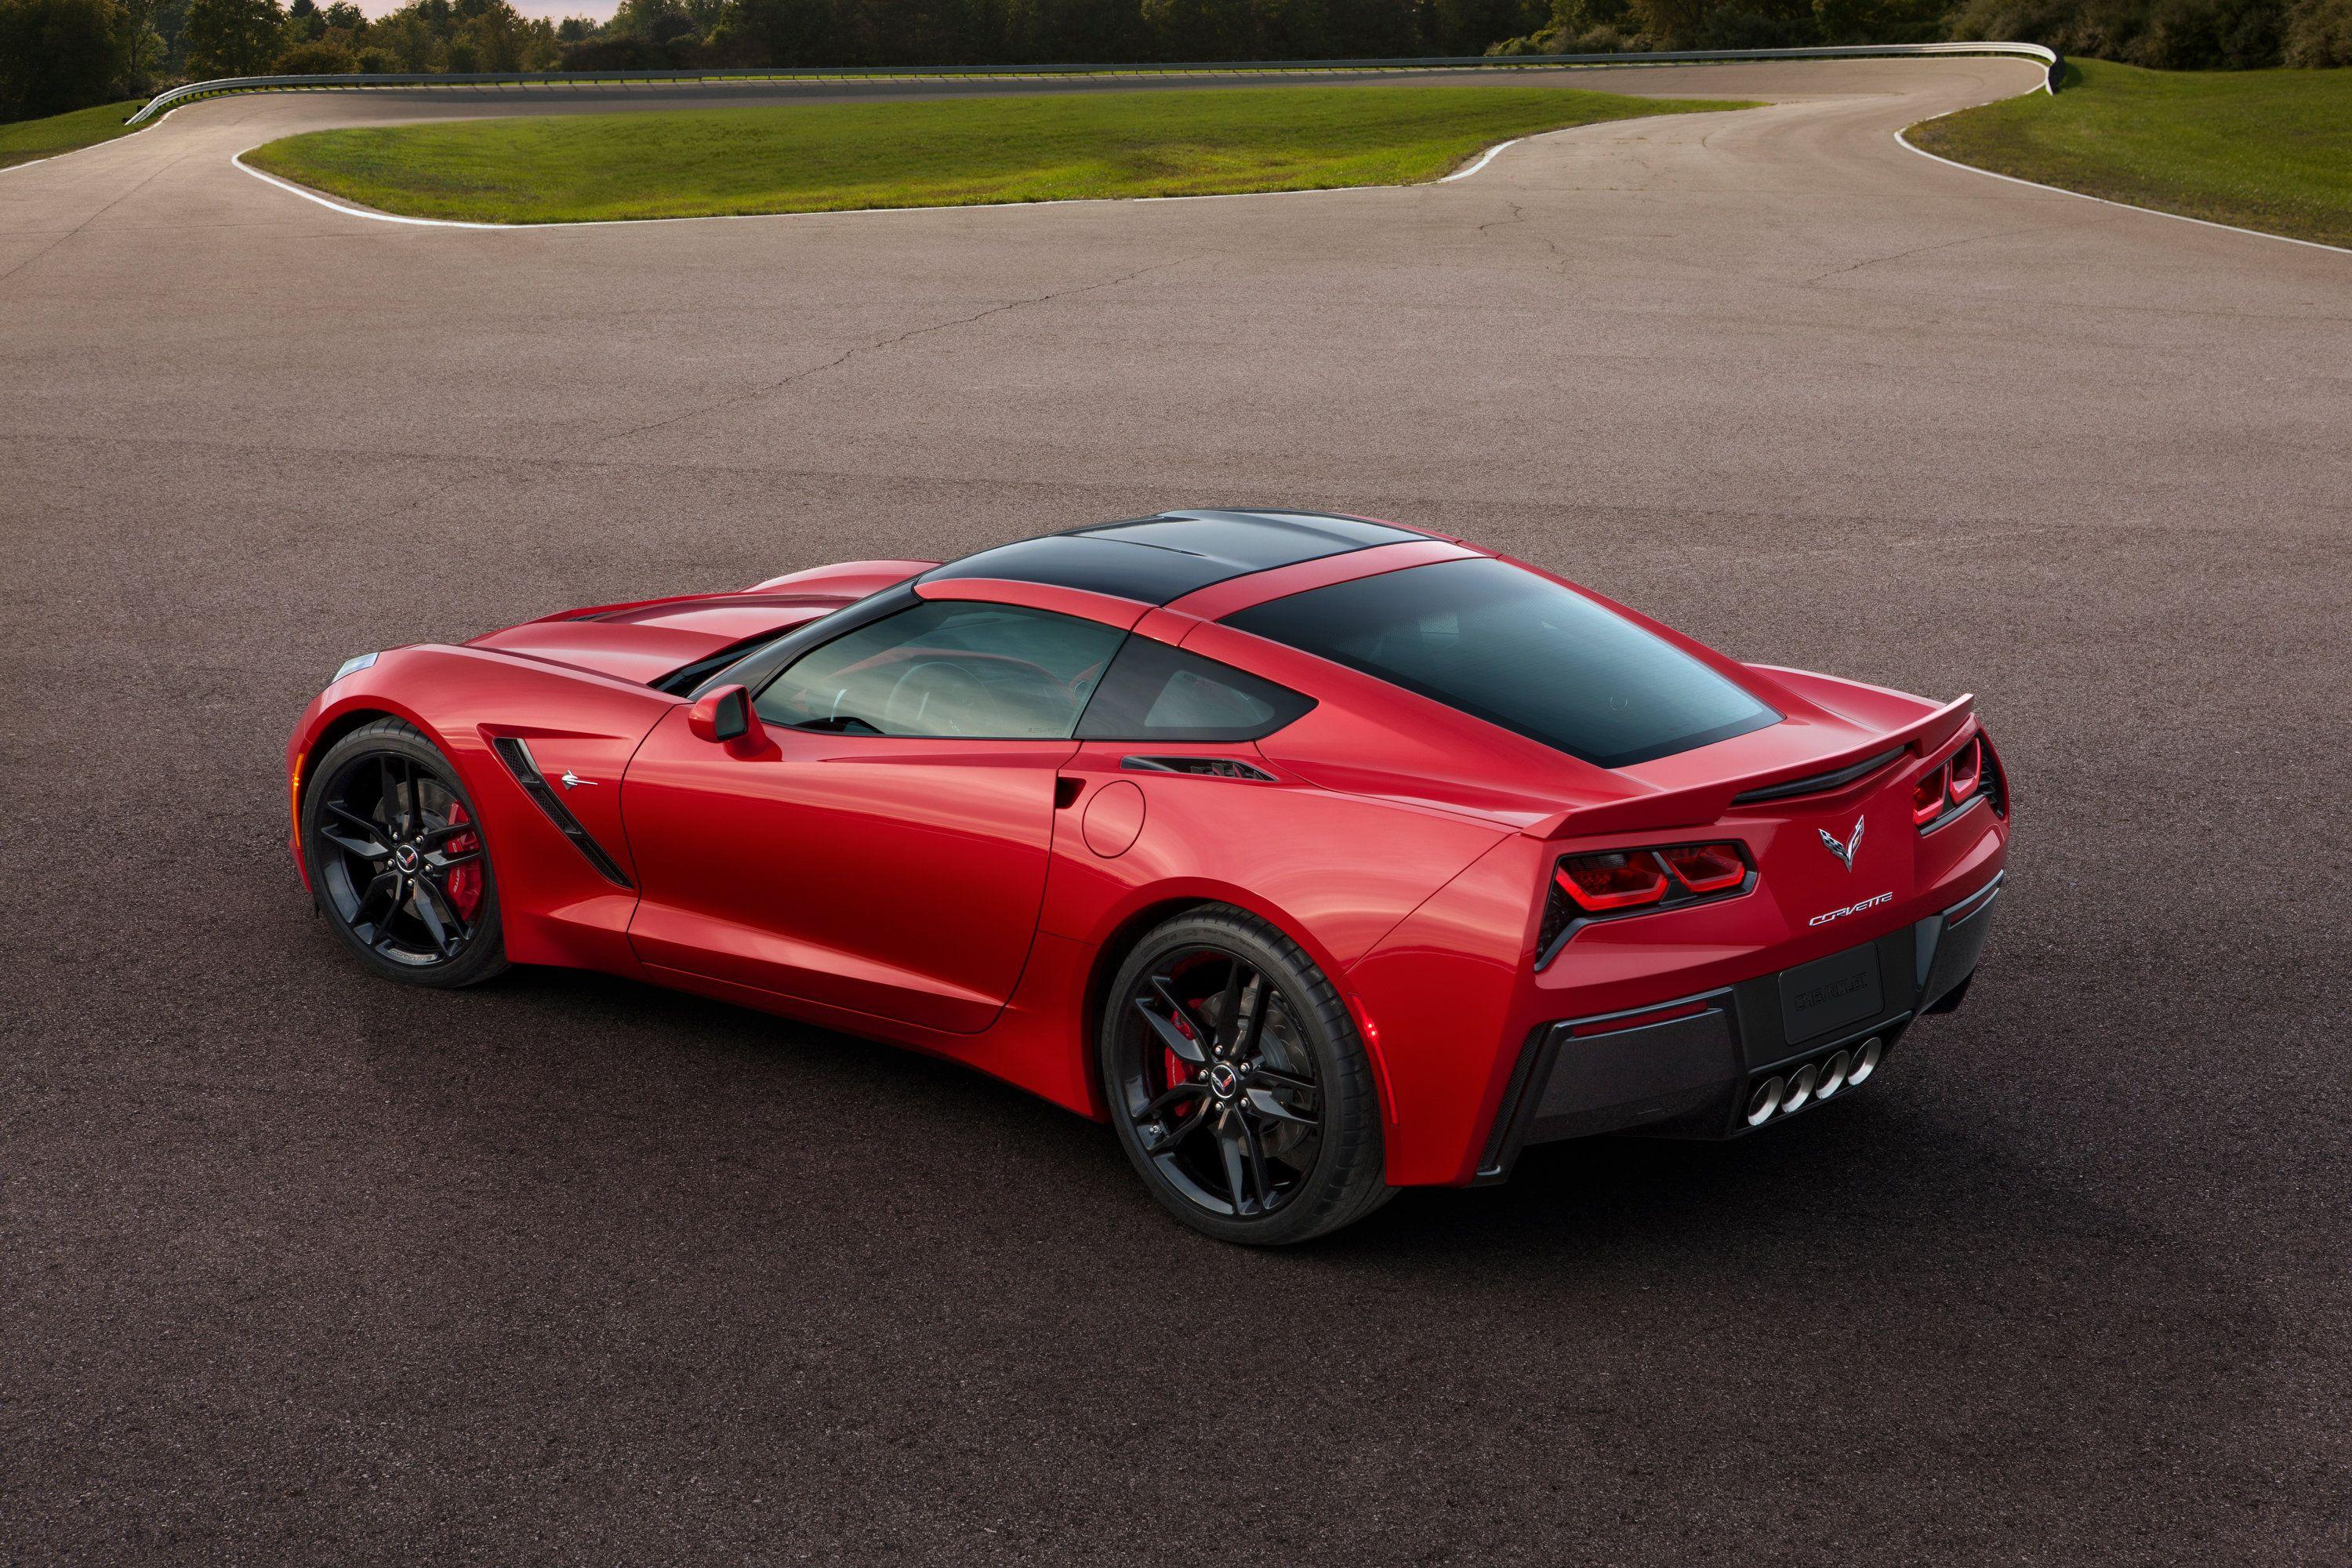 new corvette 2014 stingray. For the new Corvette to be called a